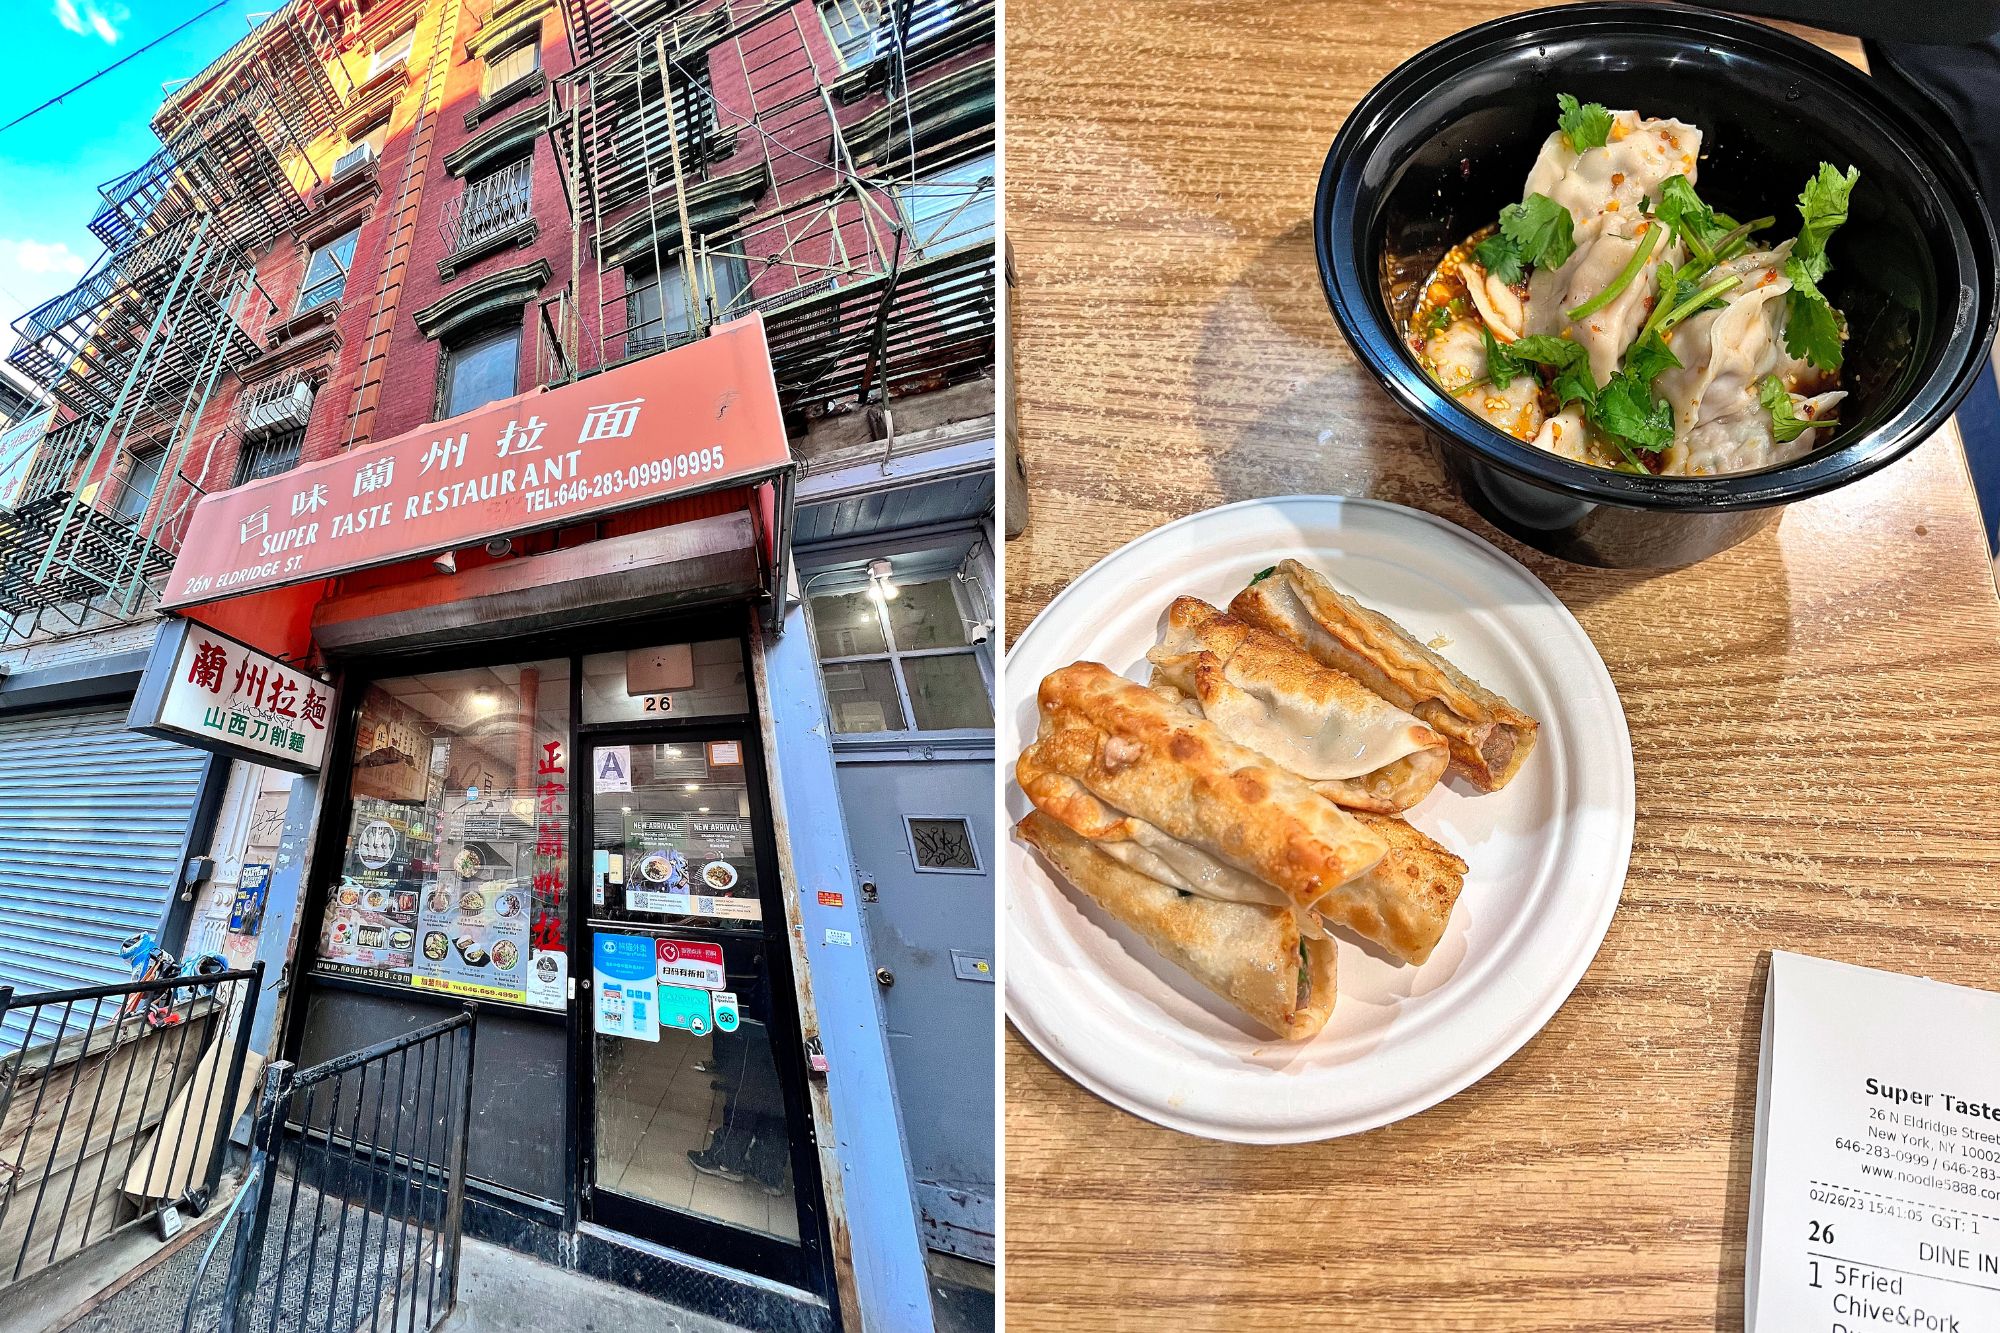 Two images: exterior of Super Taste and two types of dumplings